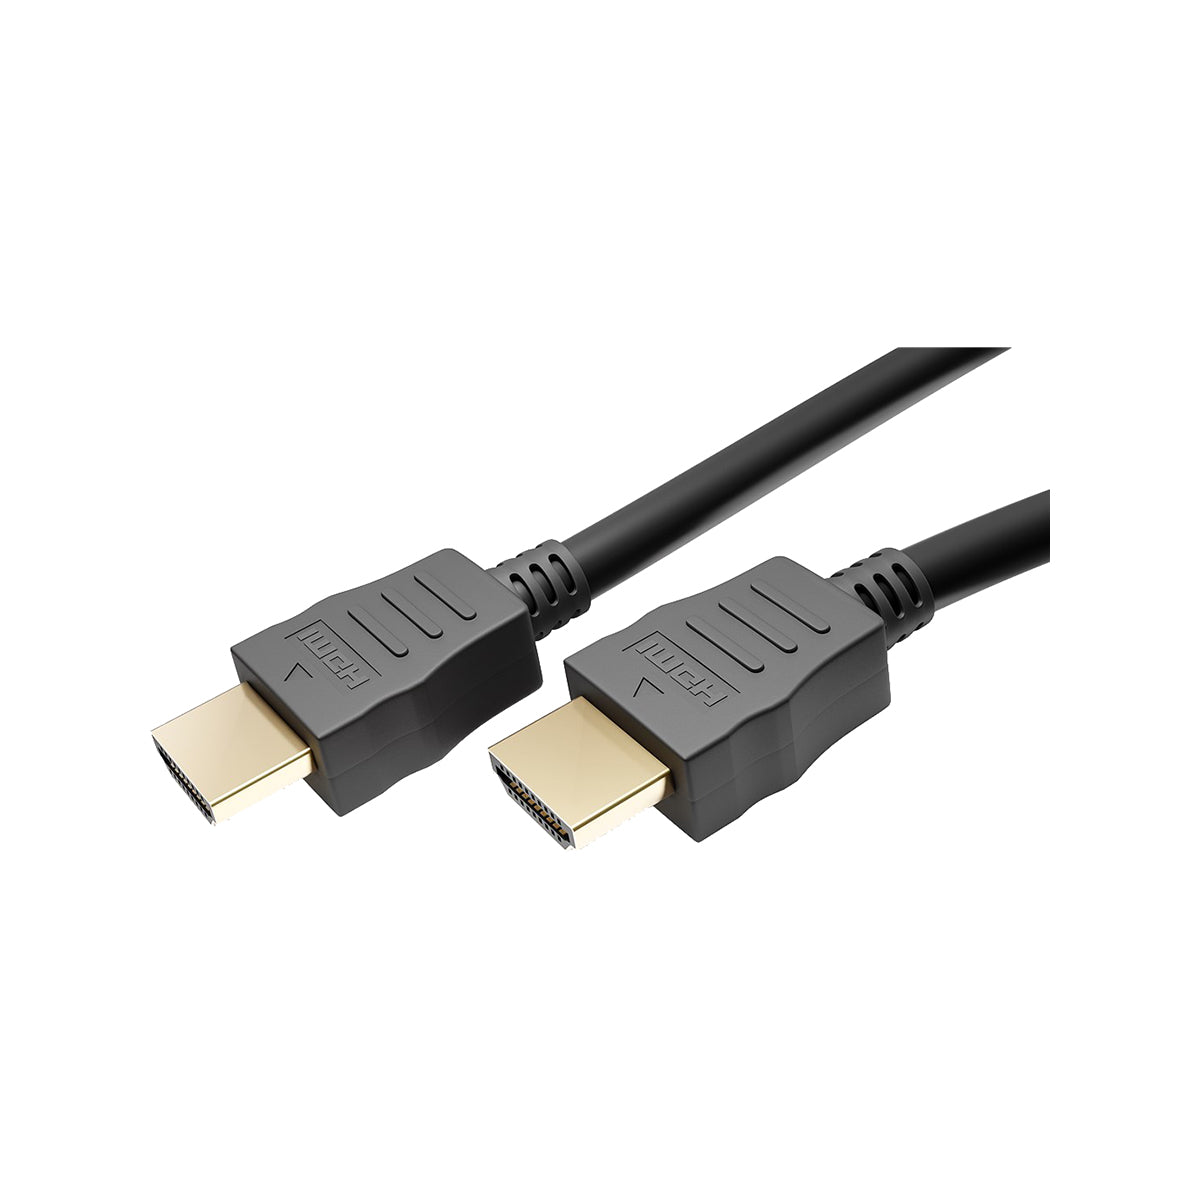 Goobay High Speed HDMI™ Cable with Ethernet (4K@60Hz) 2M for Laptops